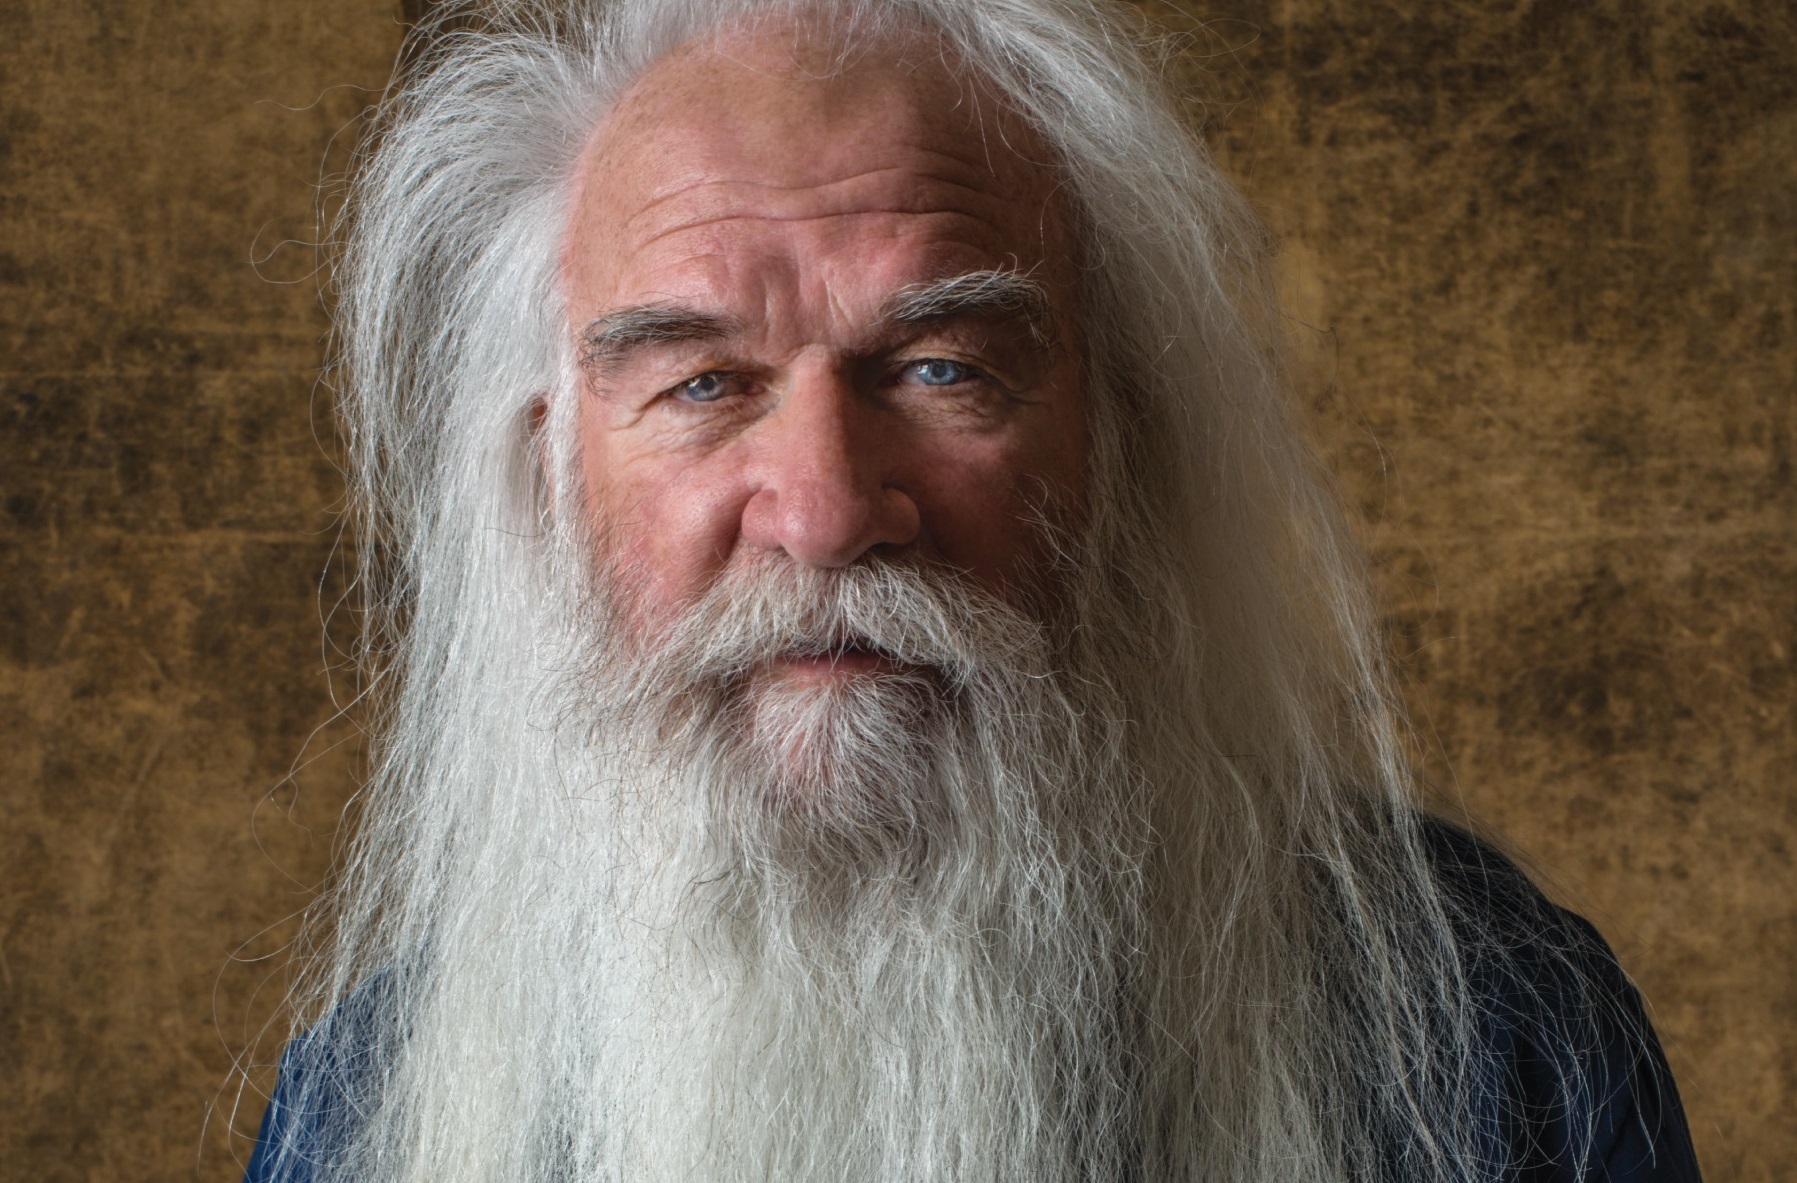 William Lee Golden Shares Life Story in New Book, 'Behind the Beard' Sounds  Like Nashville